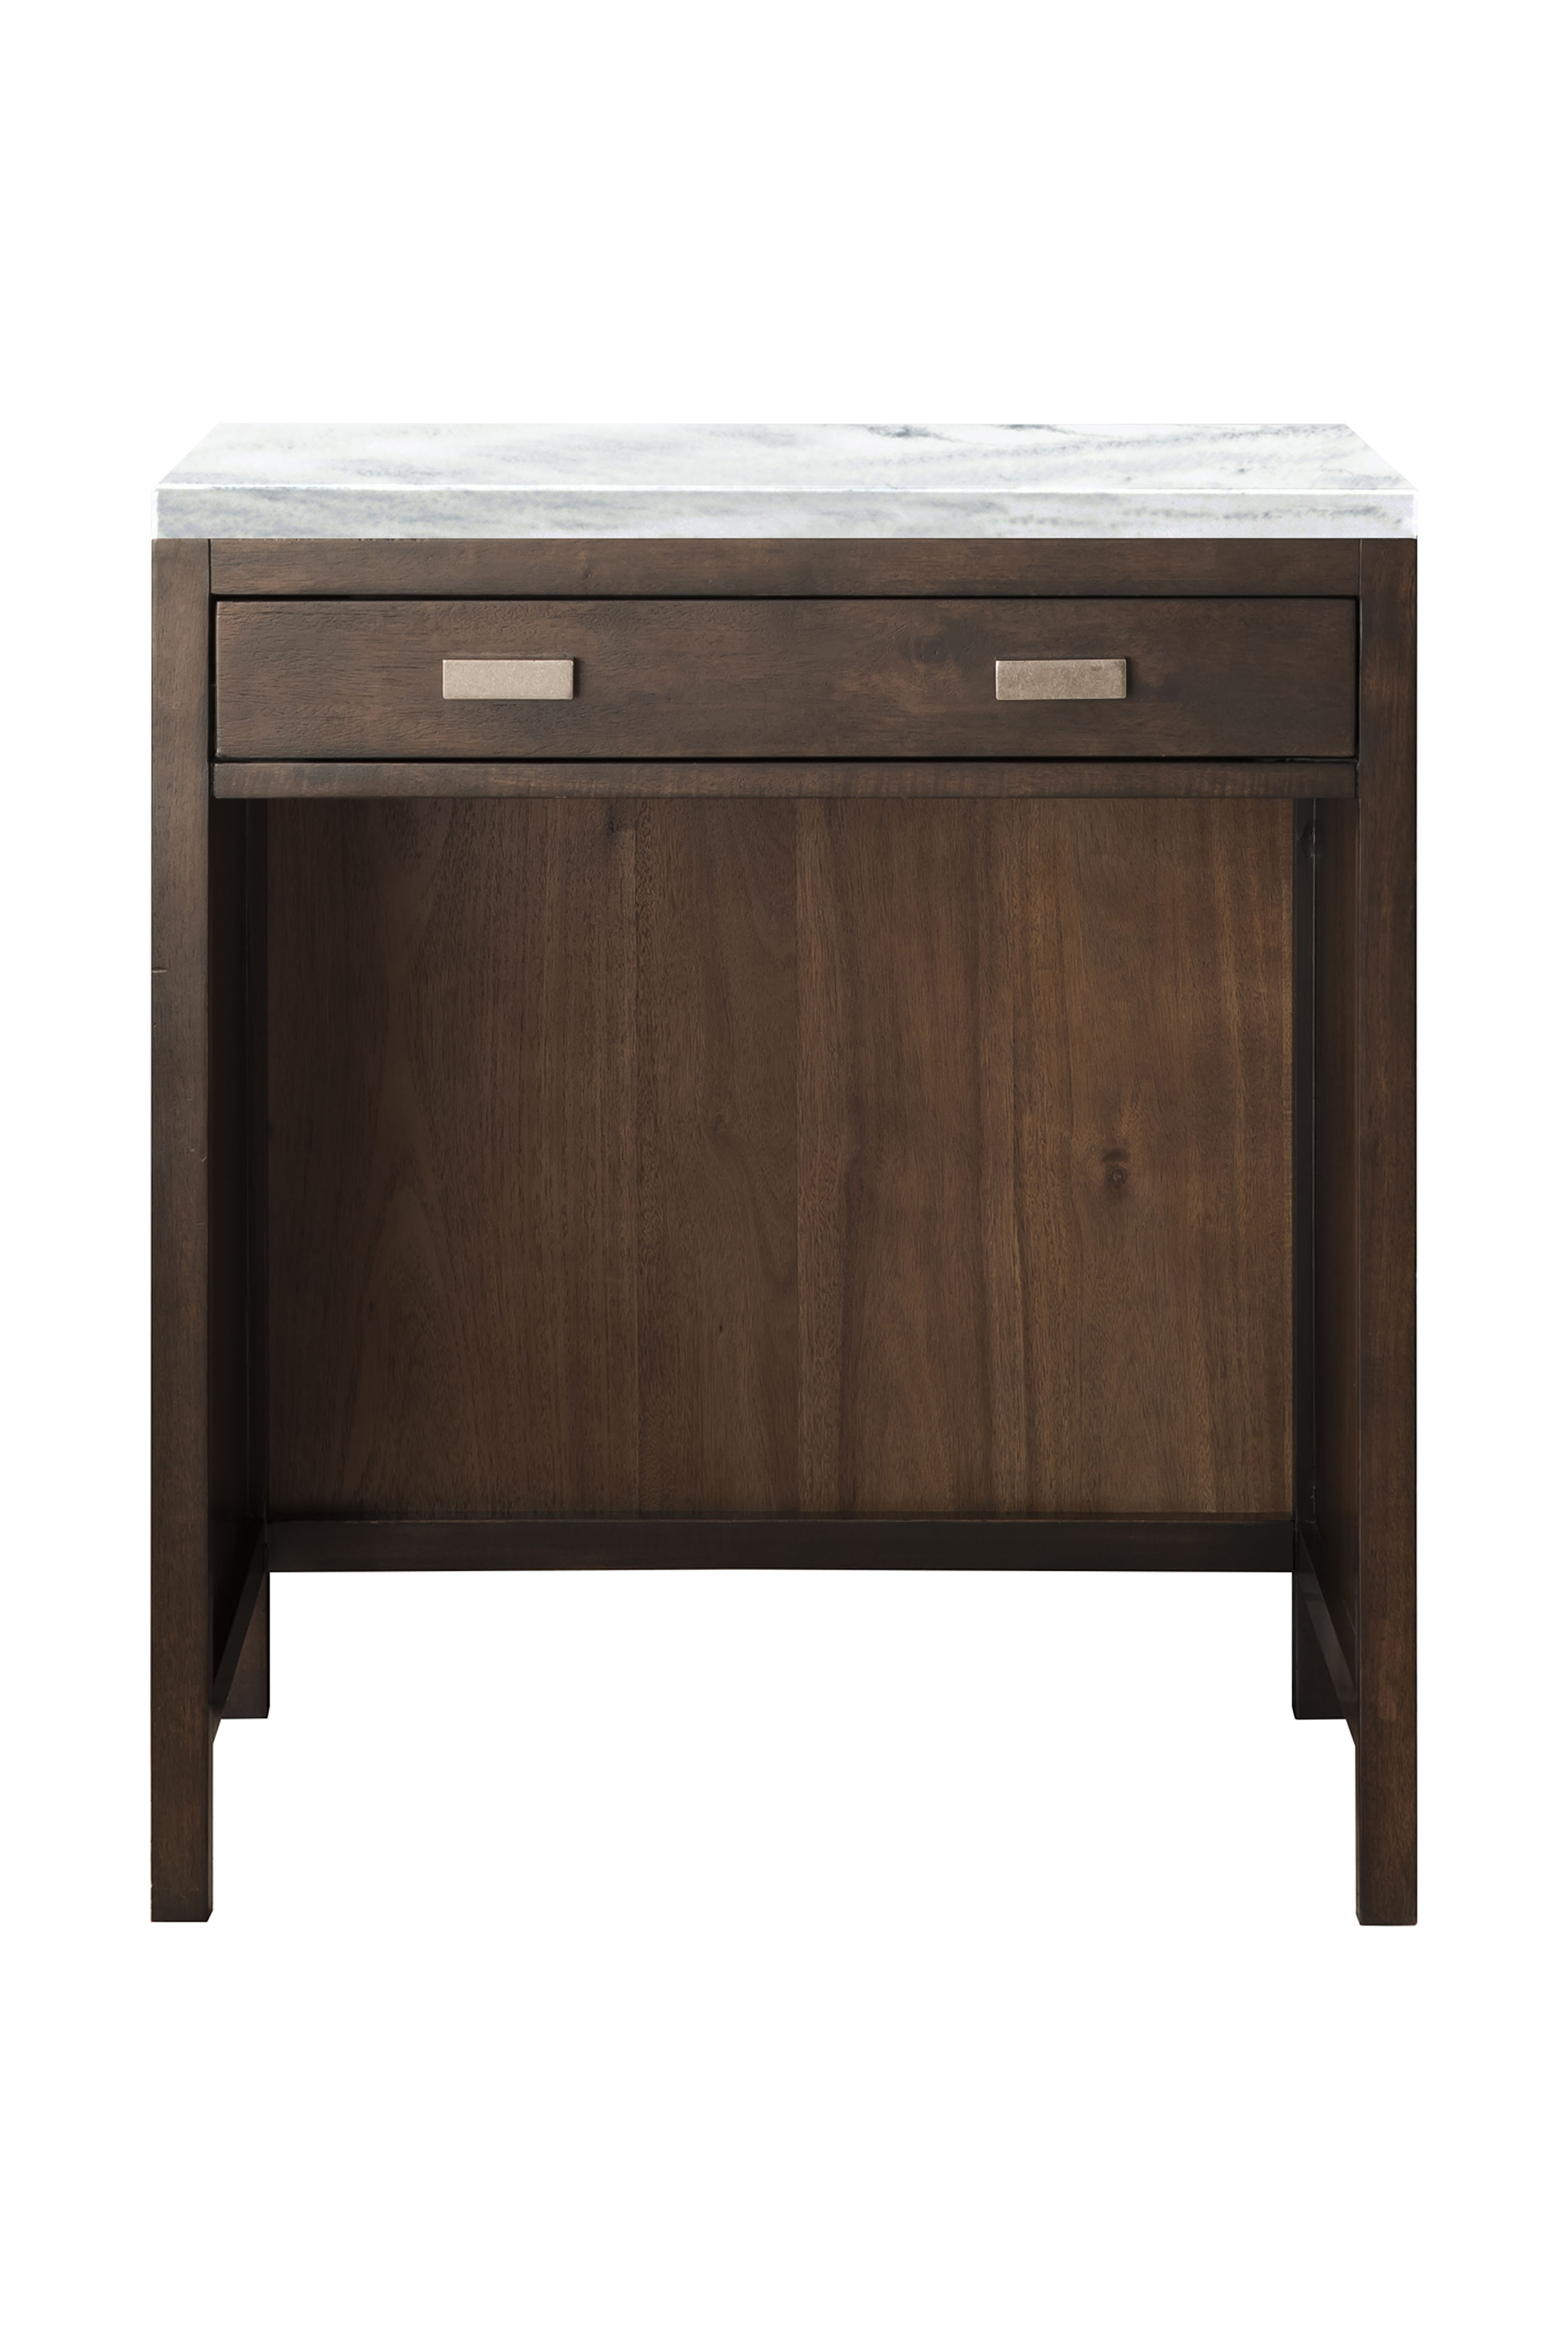 James Martin E444-CU30-MCA-3AF Addison 30" Free-standing Countertop Unit (Makeup Counter), Mid Century Acacia w/ 3 CM Arctic Fall Solid Surface Top